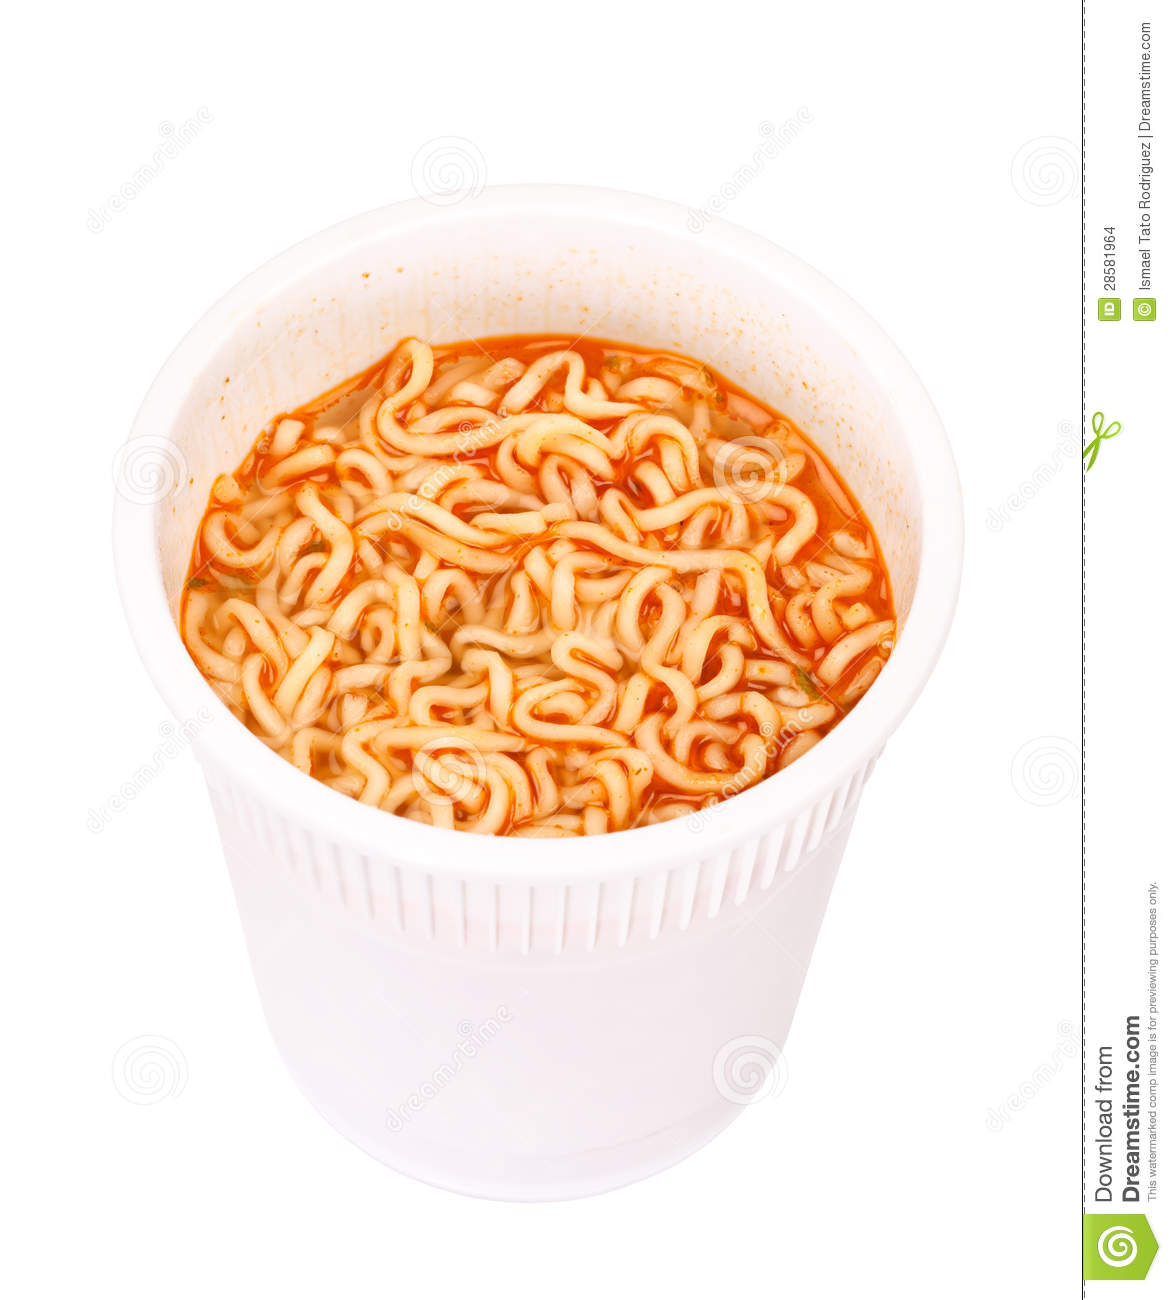 One Cup Of Cooked Instant Noodles  Typical Asian Food  Isolated On